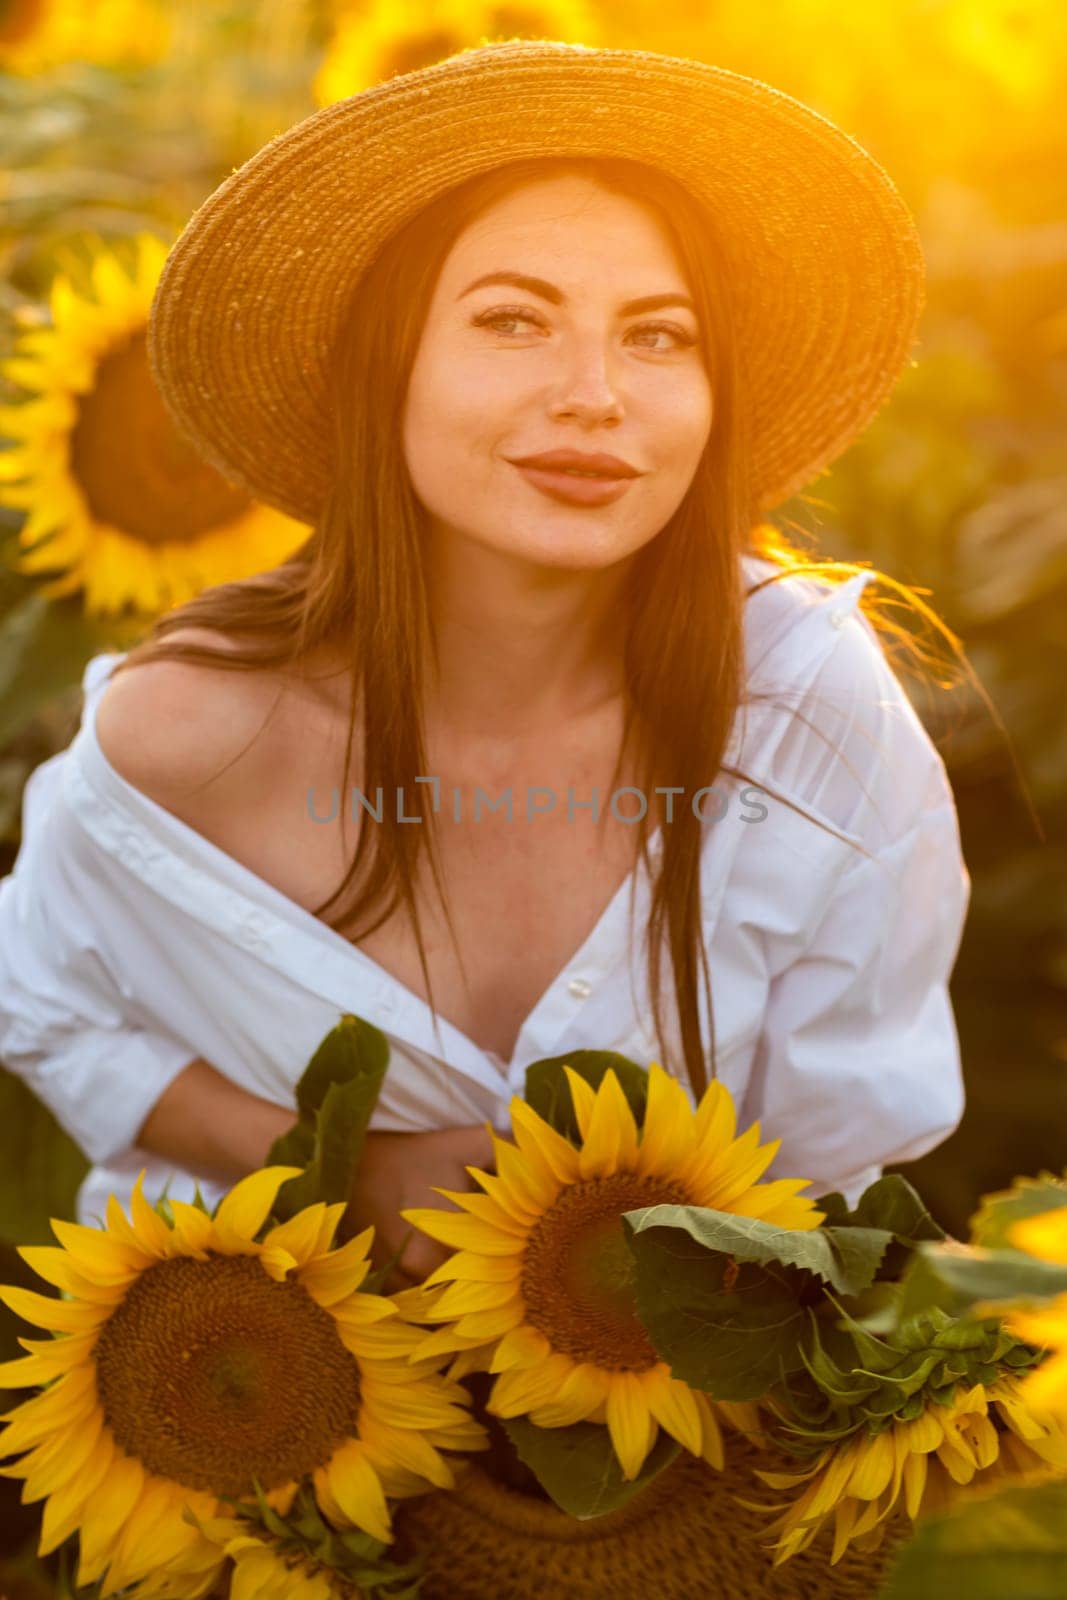 A girl in a hat on a beautiful field of sunflowers against the sky in the evening light of a summer sunset. Sunbeams through the flower field. Natural background